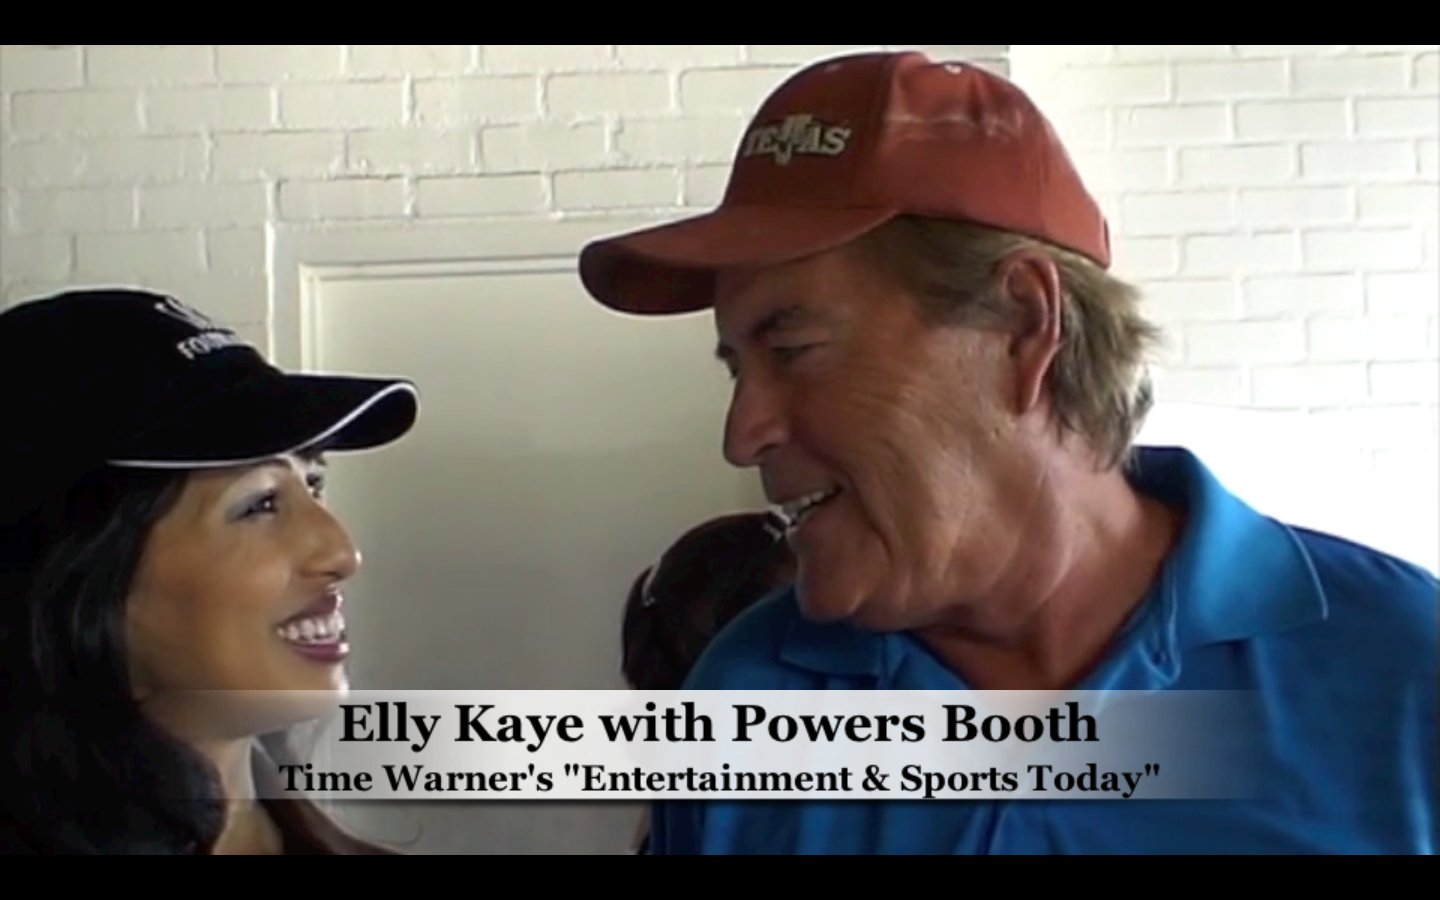 Elly Kaye interviews Powers Boothe at the Inaugural SAG Foundation Golf Classic! Celebrities play to benefit the SAG Foundation's Catastrophic Health Fund.